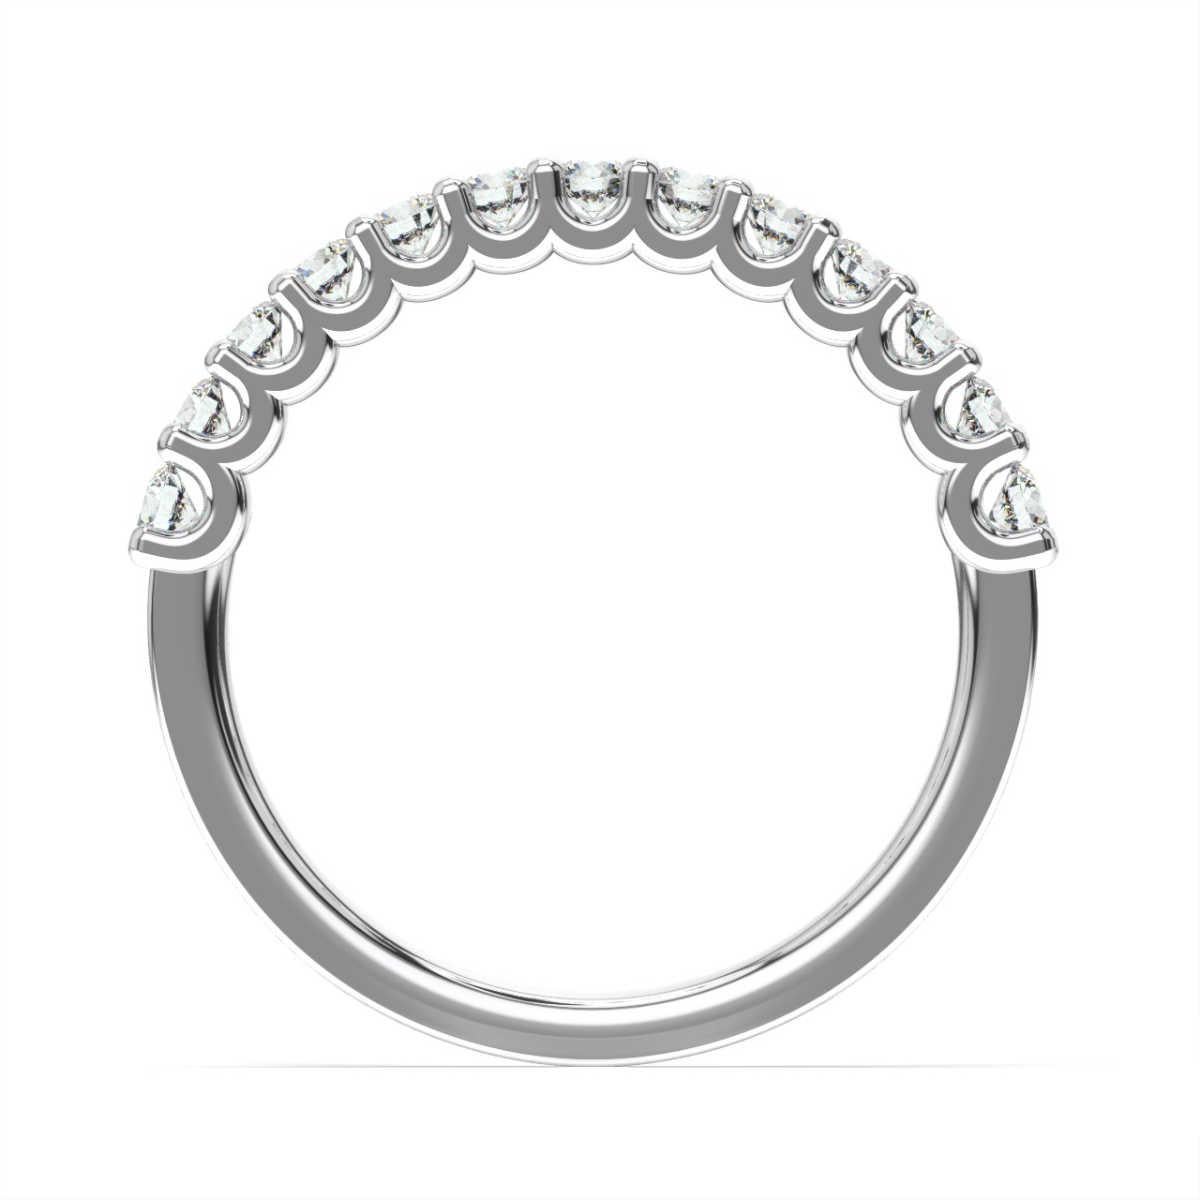 This ring features 13 round brilliant diamonds in a total weight of 1 carat set in a delicate 